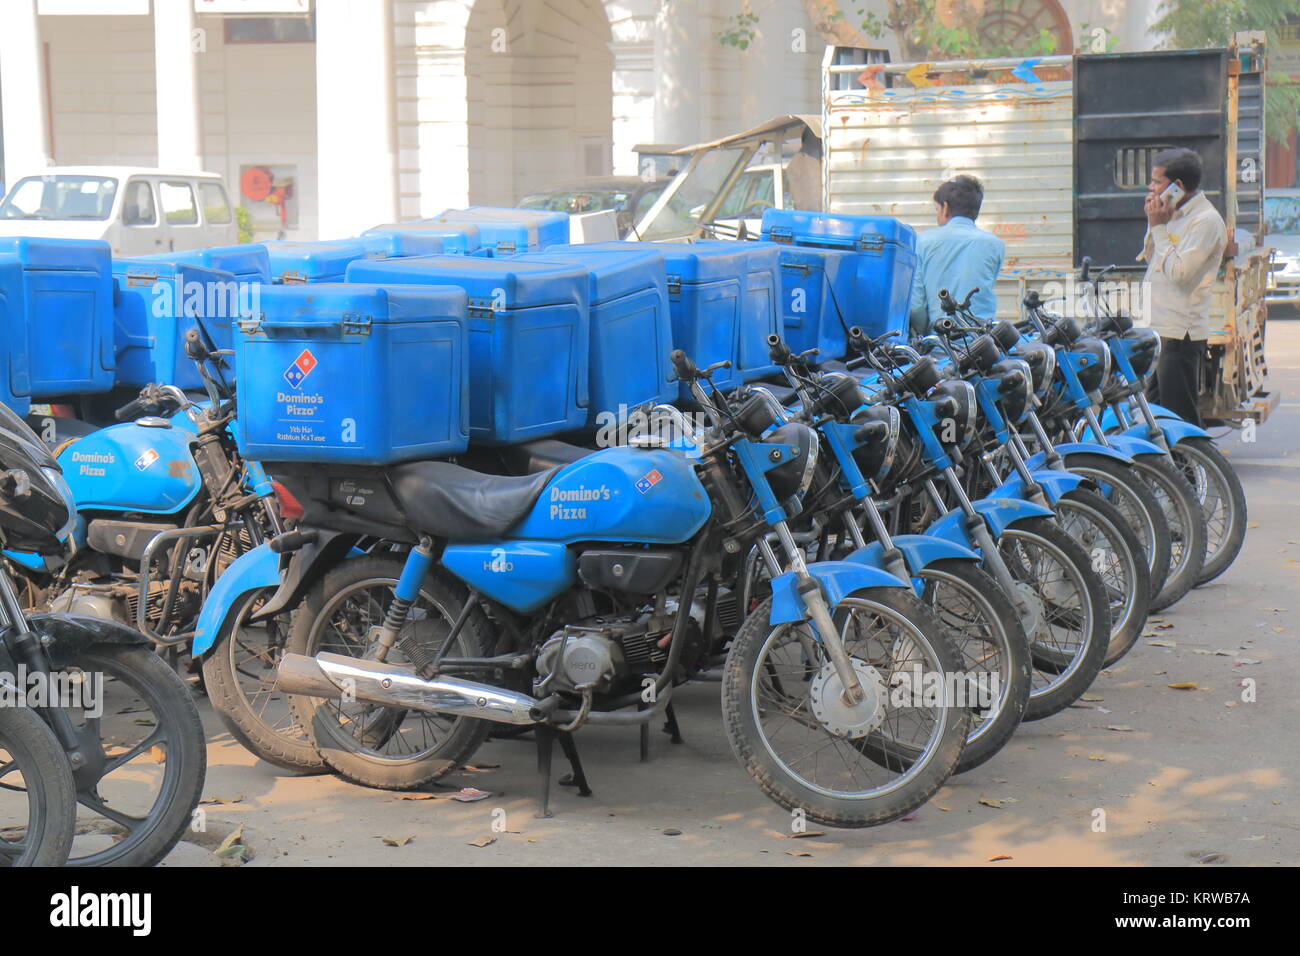 Dominos pizza fast food delivery bikes parked in downtown New Delhi India Stock Photo